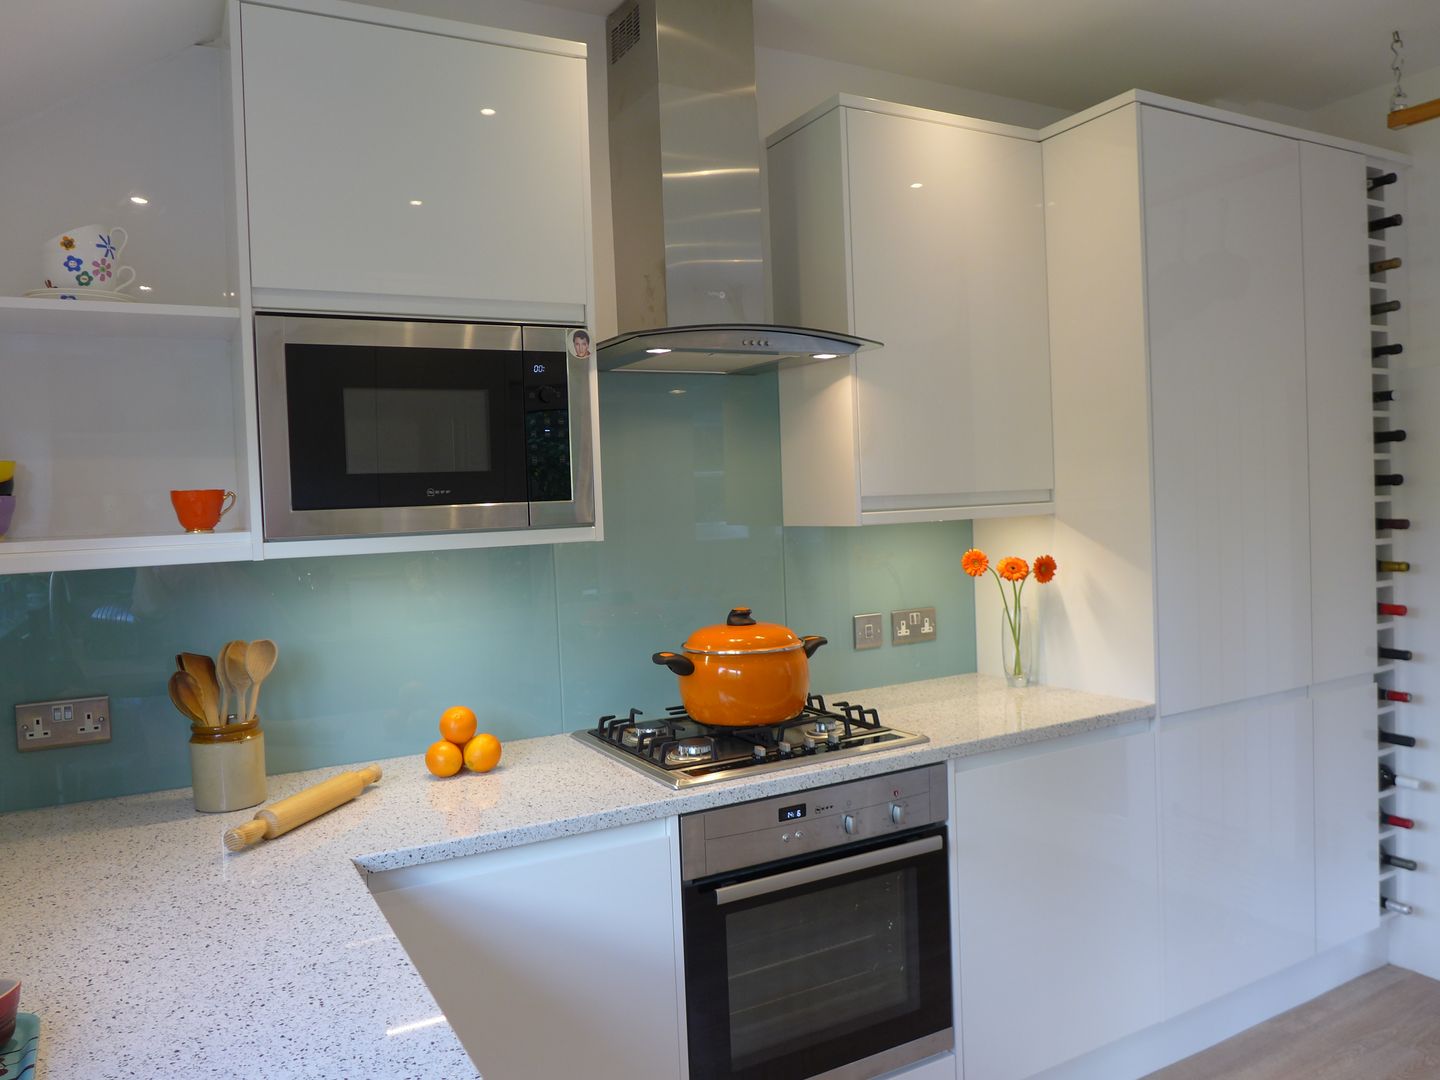 Modern white gloss kitchen Style Within Moderne Küchen white kitchen,gloss kitchen,modern kitchen,flat kitchen cabinet,integrated microwave,integrated handle,kitchen lighting,glass splashback,kitchen splashback,blue splashback,quartz worktop,white worktop